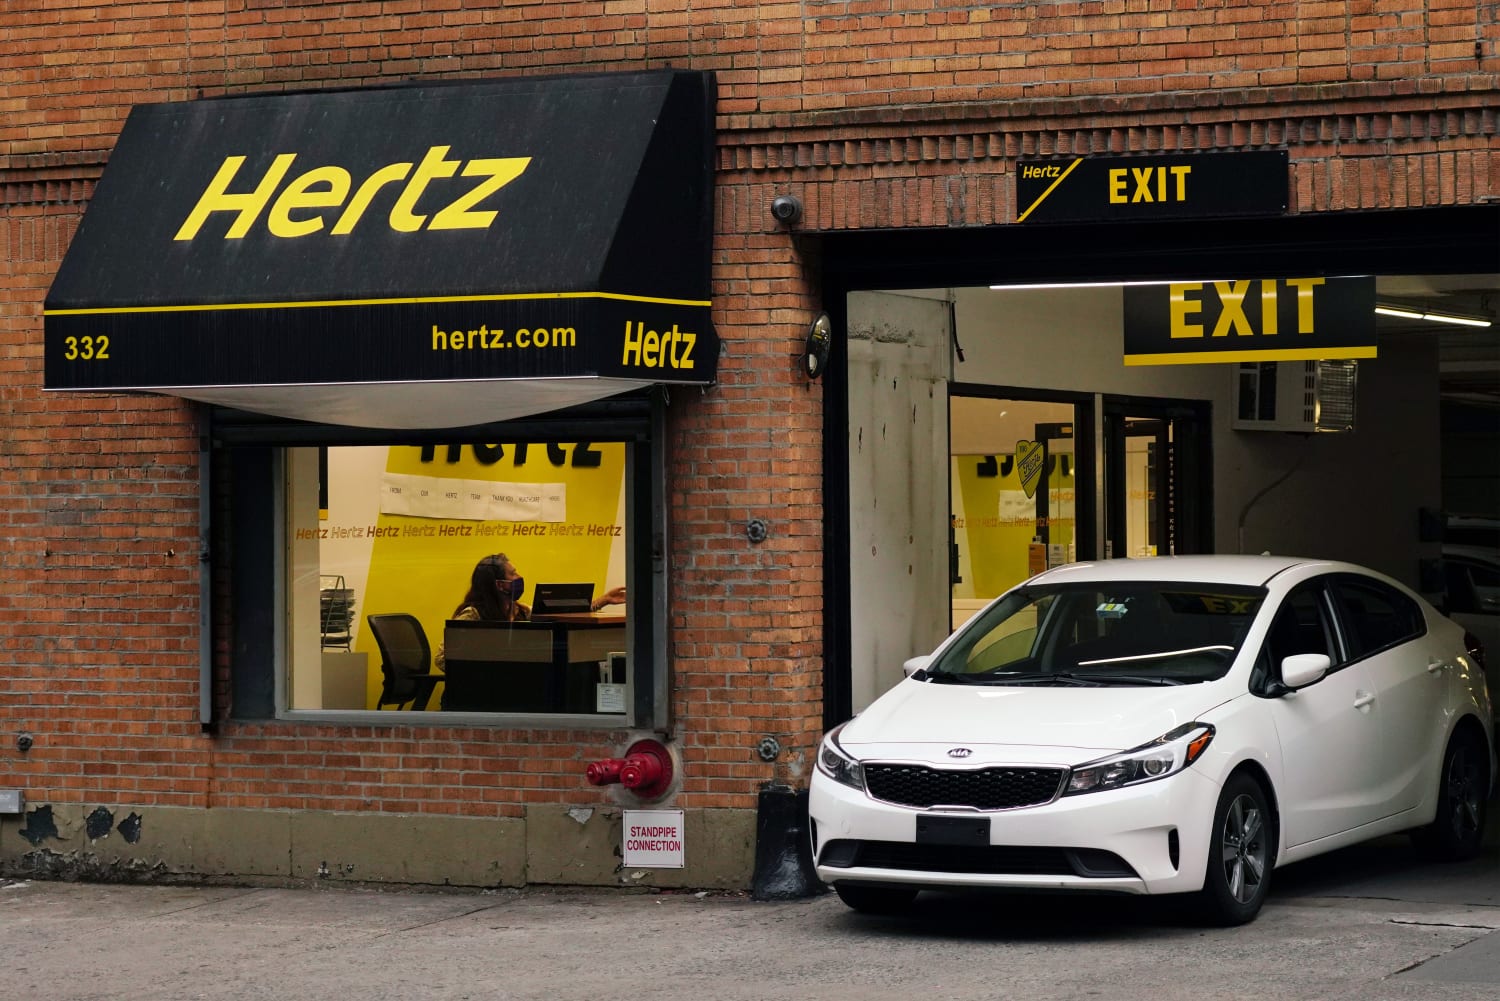 Hertz is the Latest to Give Execs Millions While Firing Workers and Going Bankrupt